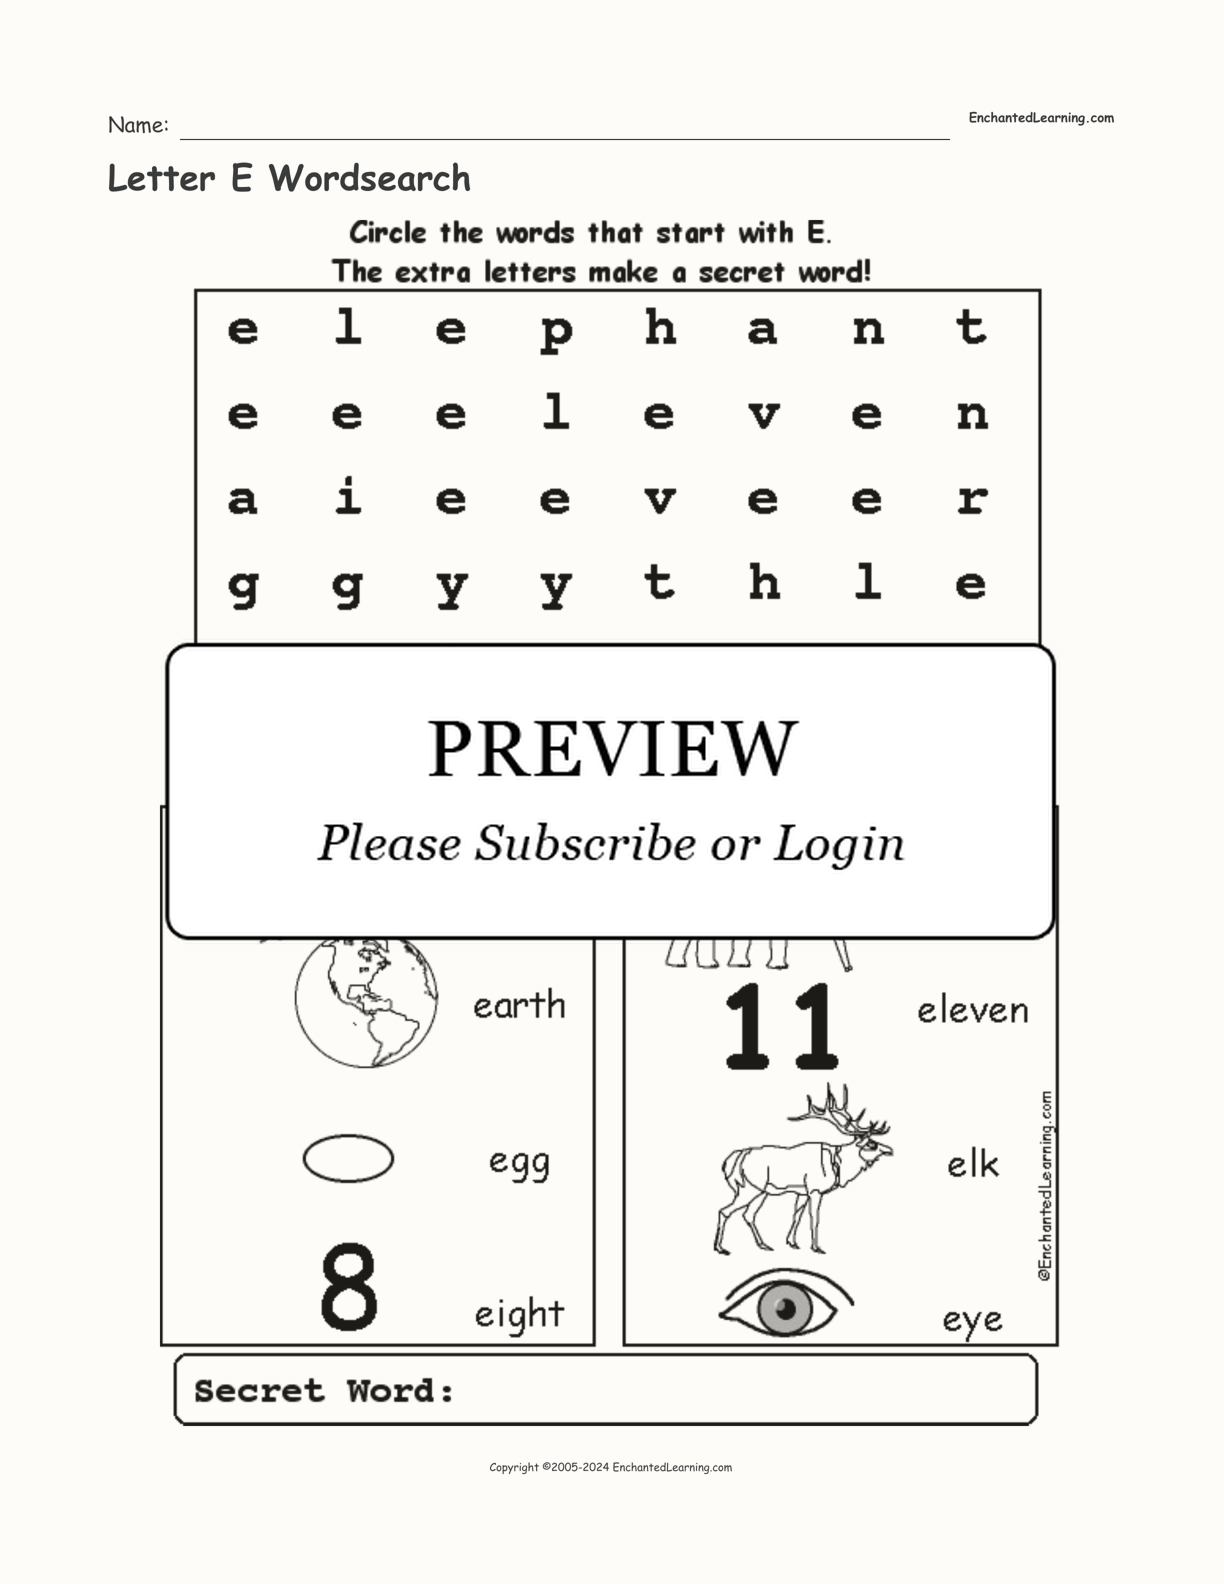 Letter E Wordsearch interactive worksheet page 1